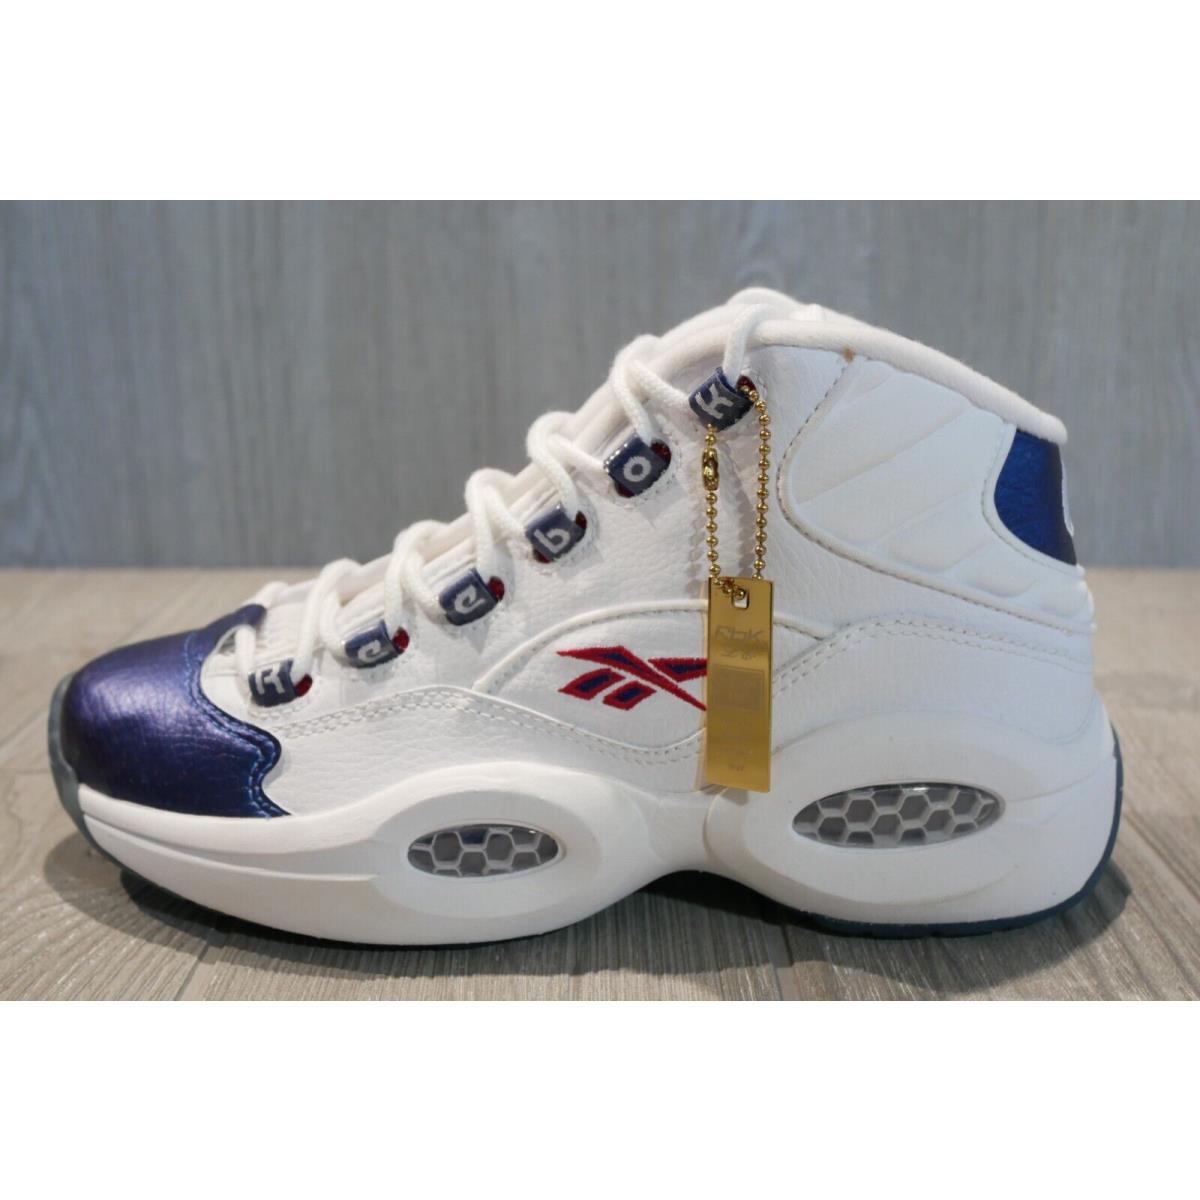 Vintage Reebok Question Mid Roy 2014 GS White Shoes Mens Size 5.5 Oss